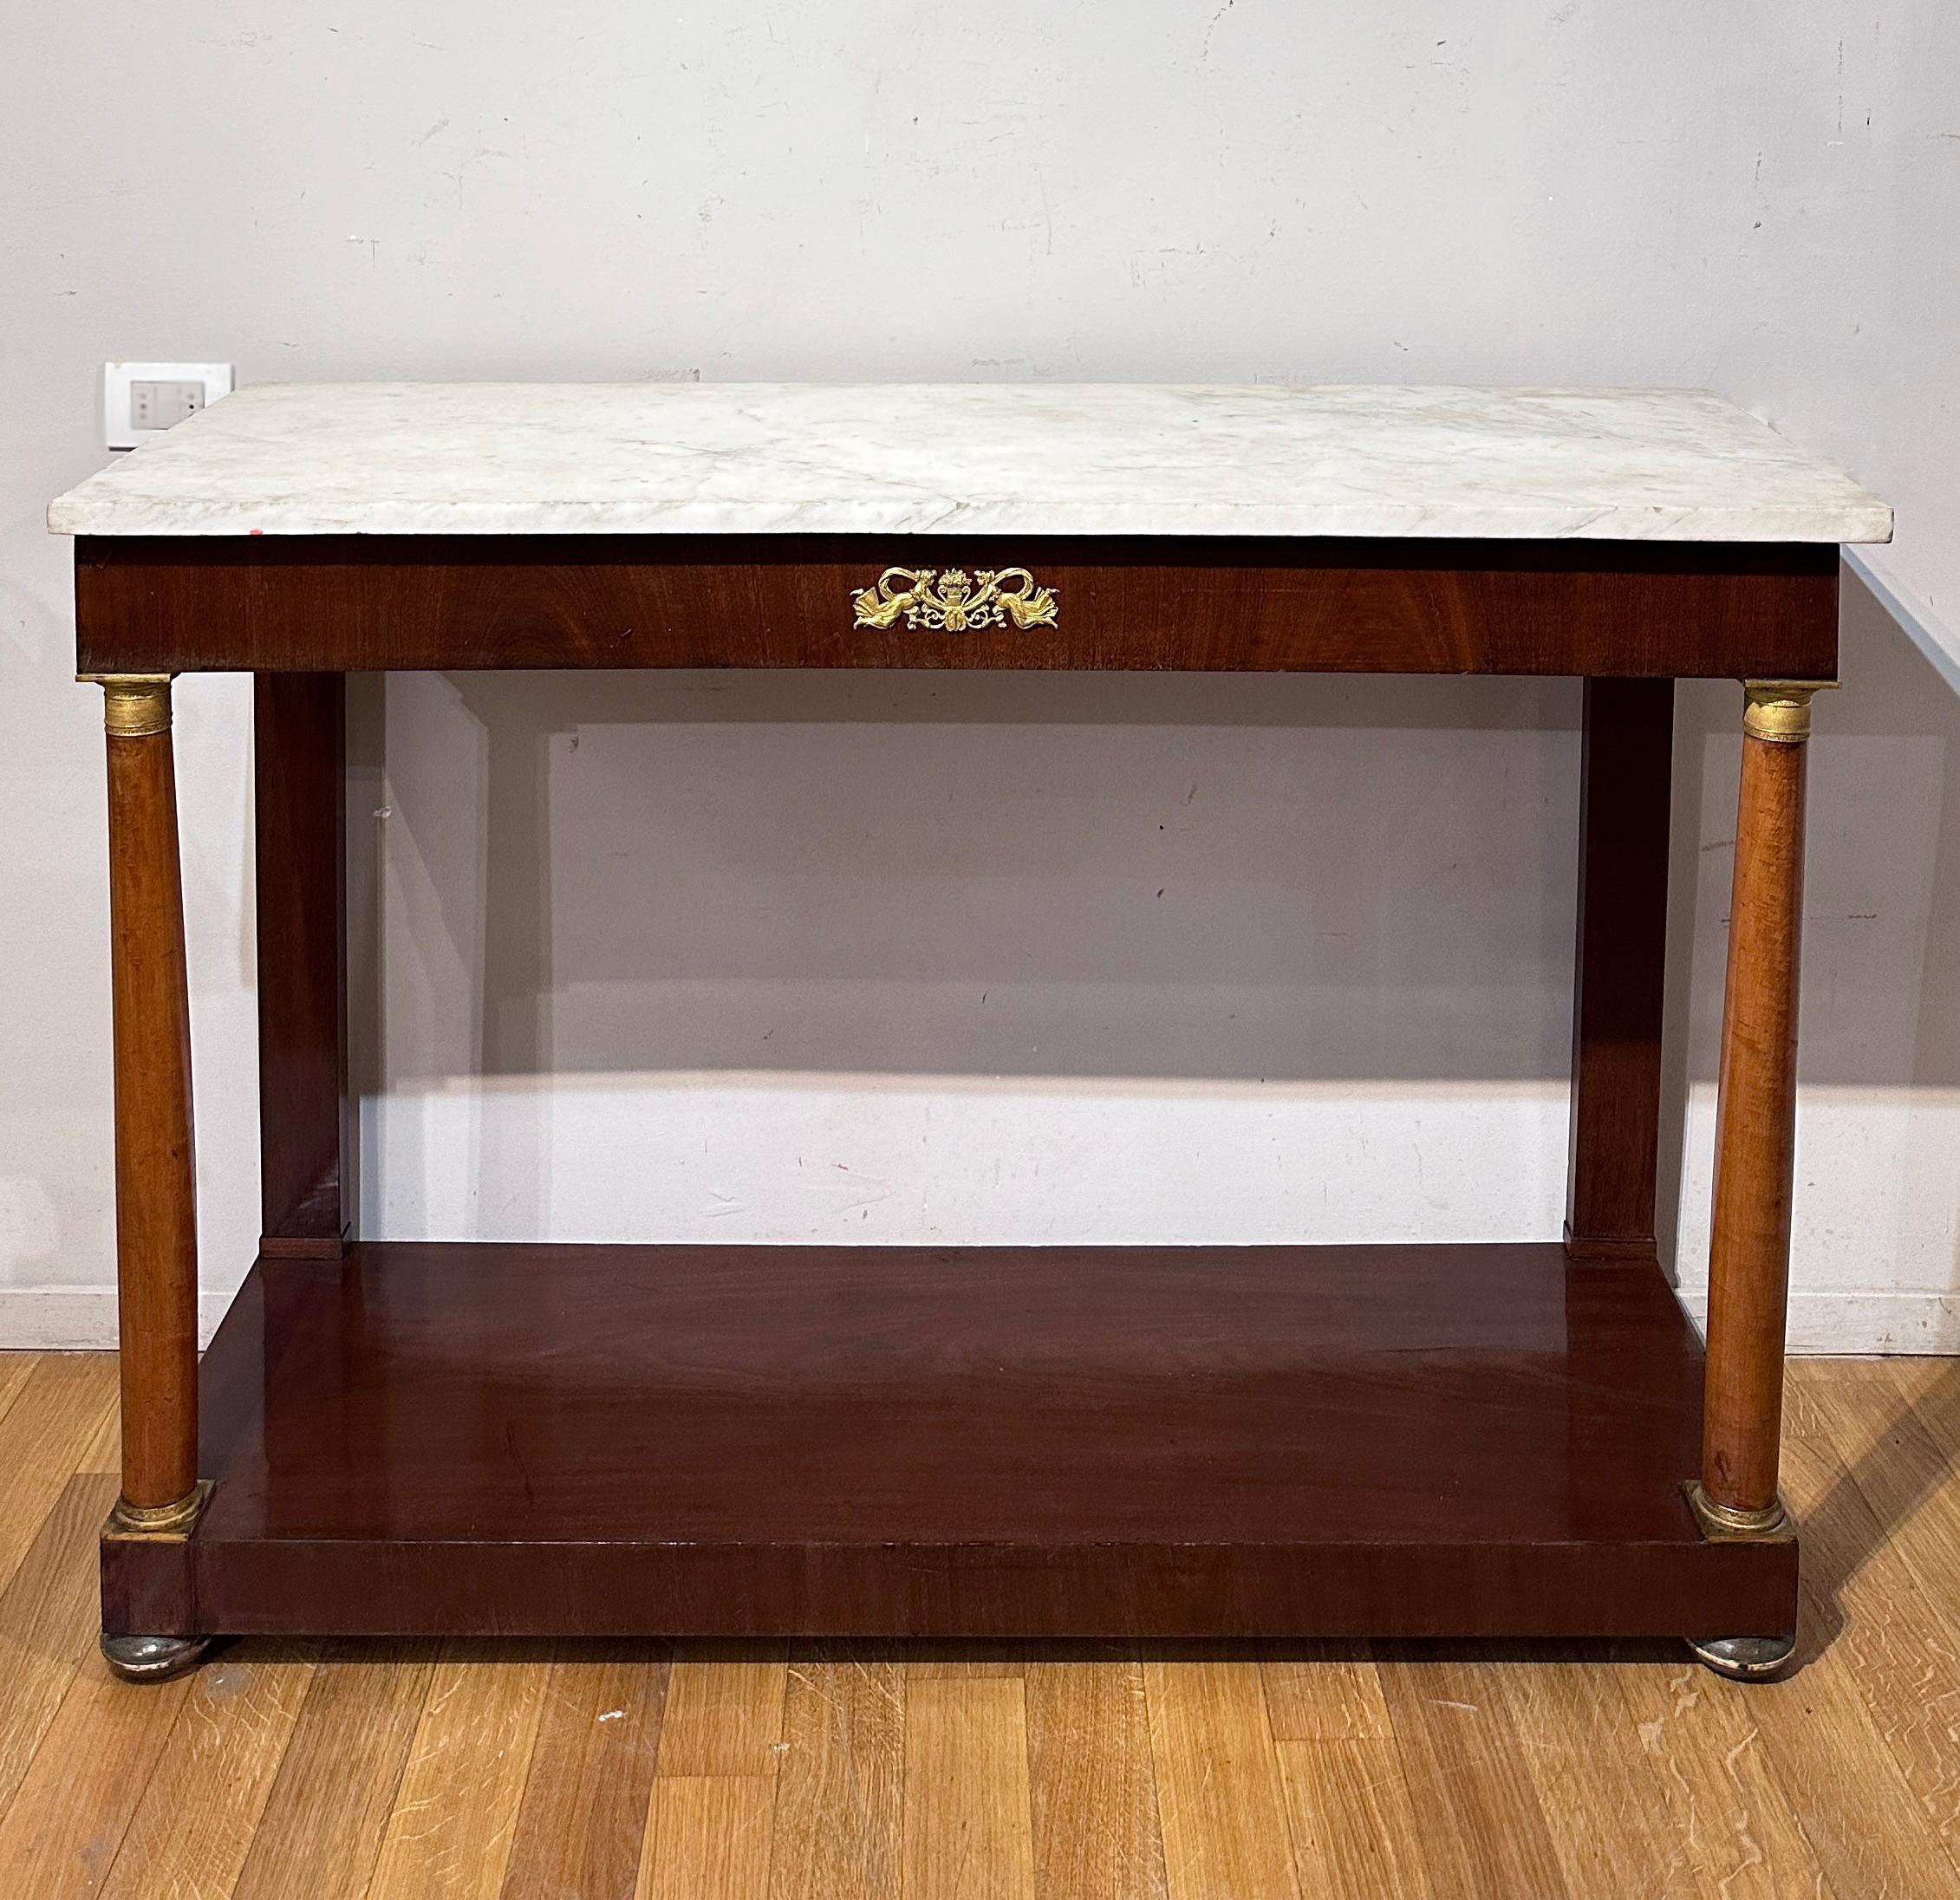 This console from the Empire period (early 19th century) is made with fine mahogany wood paneling, while the columns are made from fir wood. Its structure is embellished with refined finishes and decorations in lost wax, chiseled and gilded bronze,